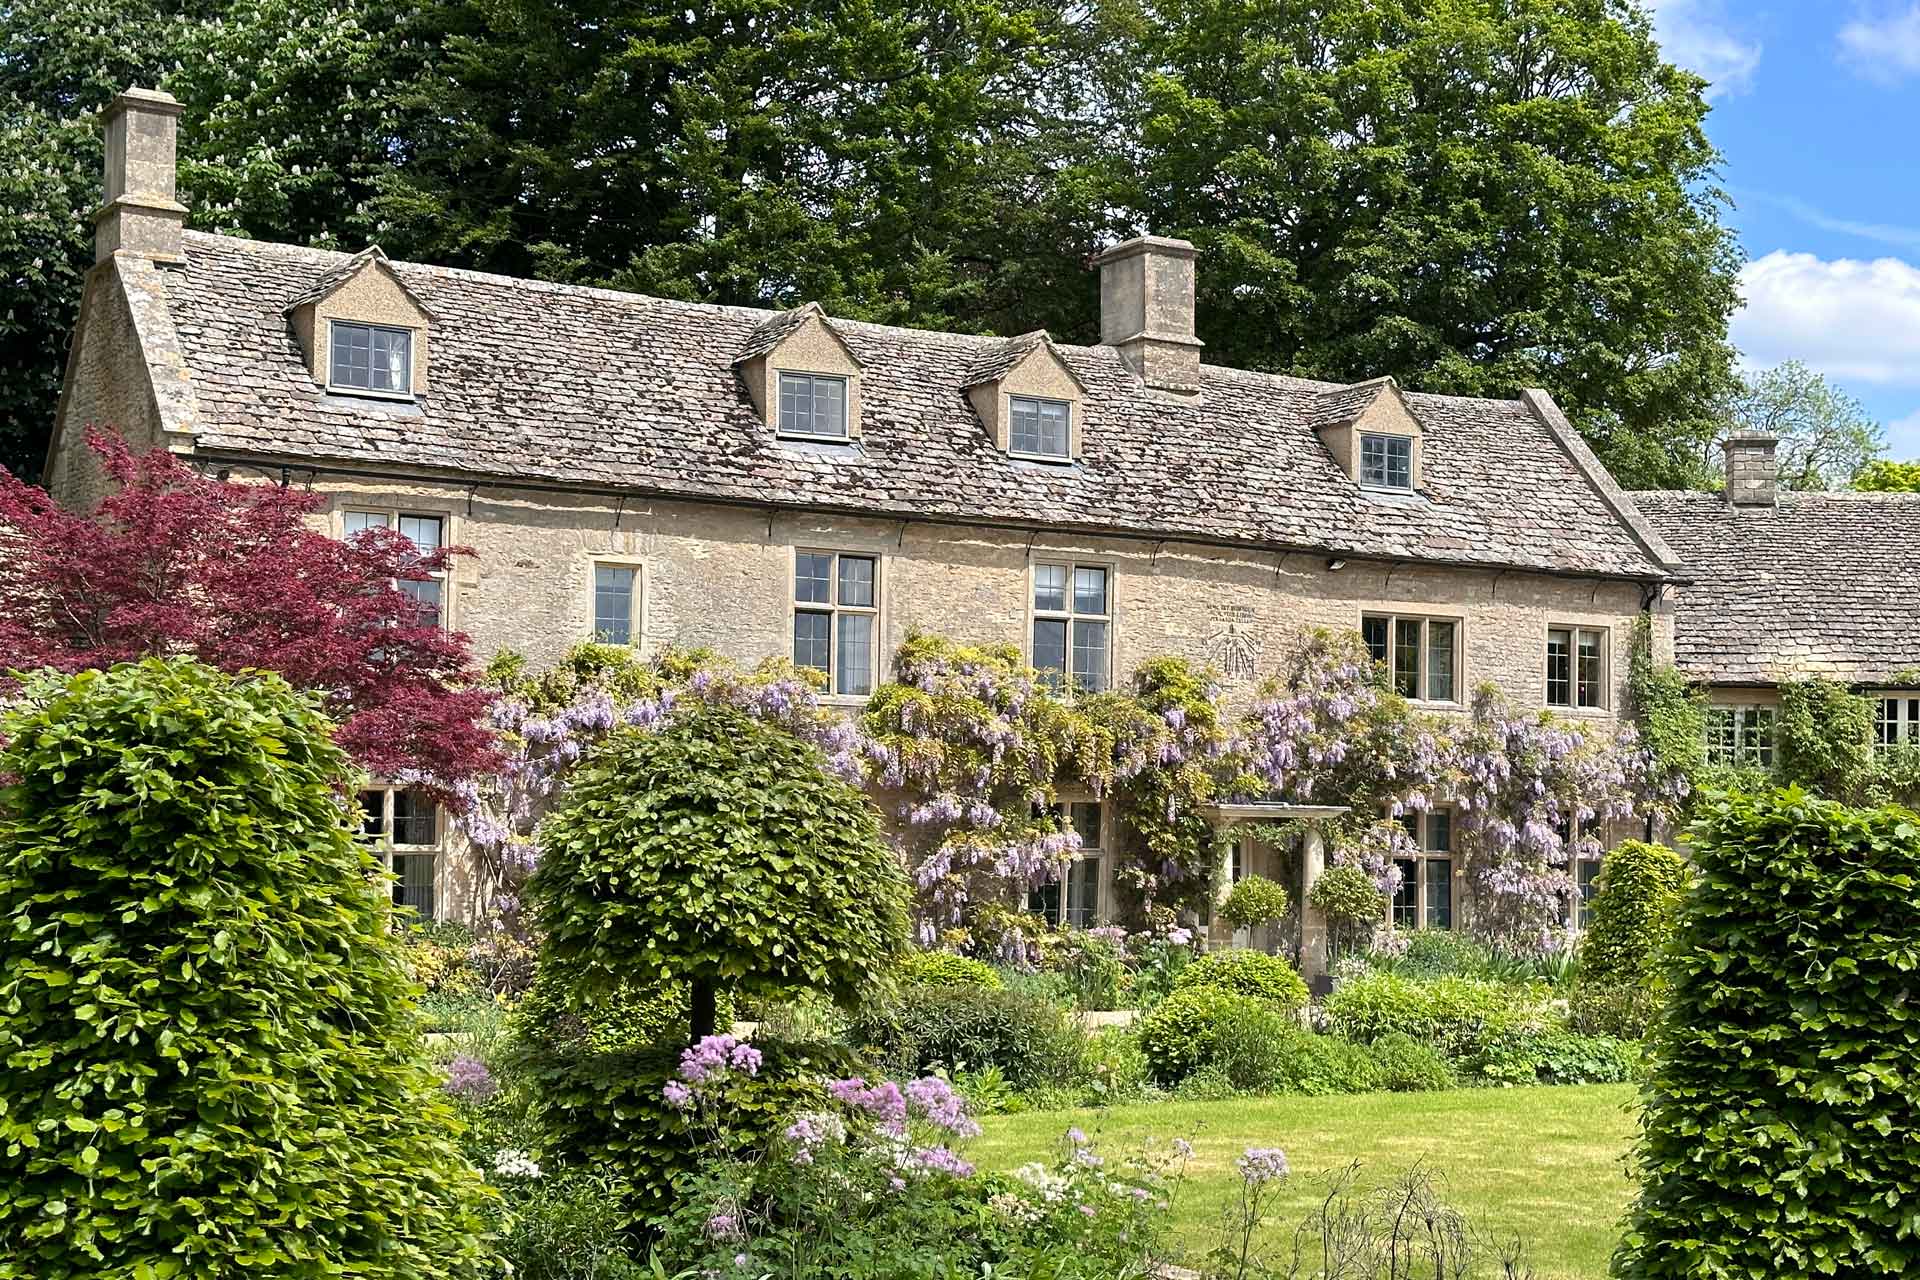 Home with wisteria-clad Cotswold stone exterior.